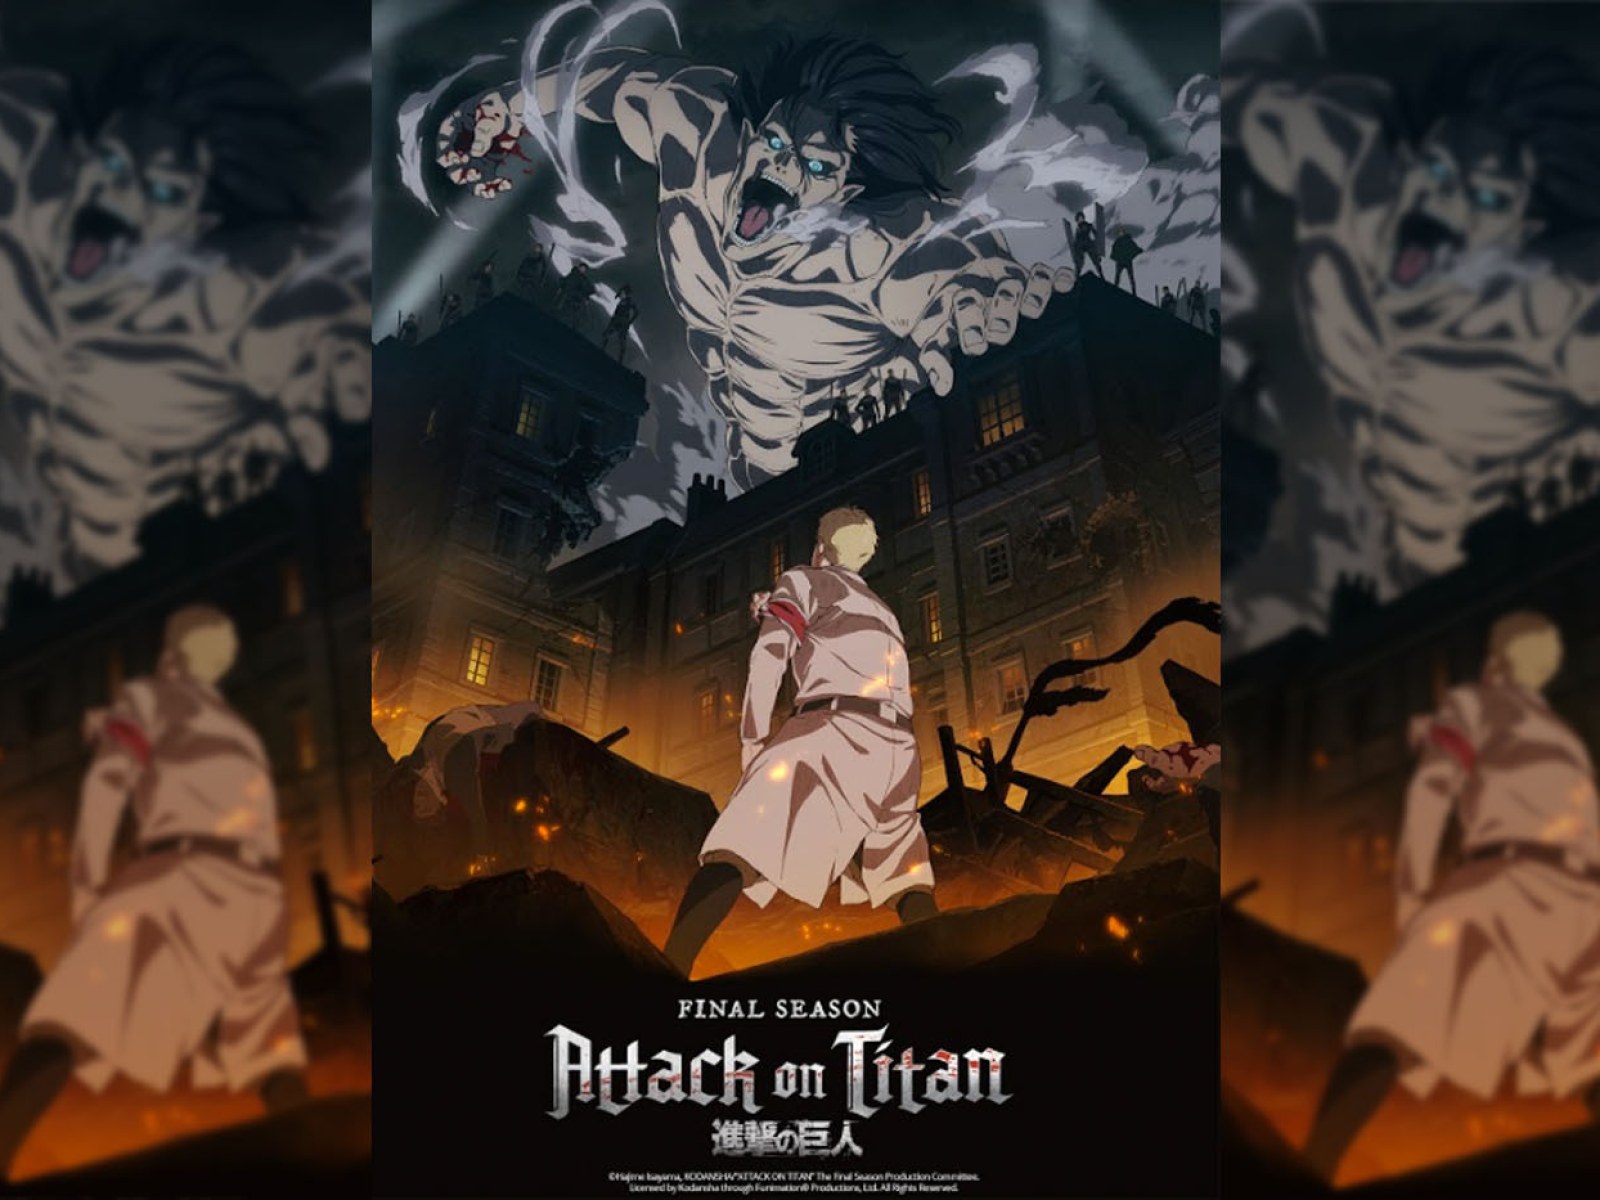 Attack on Titan' Season 4 Episode 10: Release Date and How to Watch Online